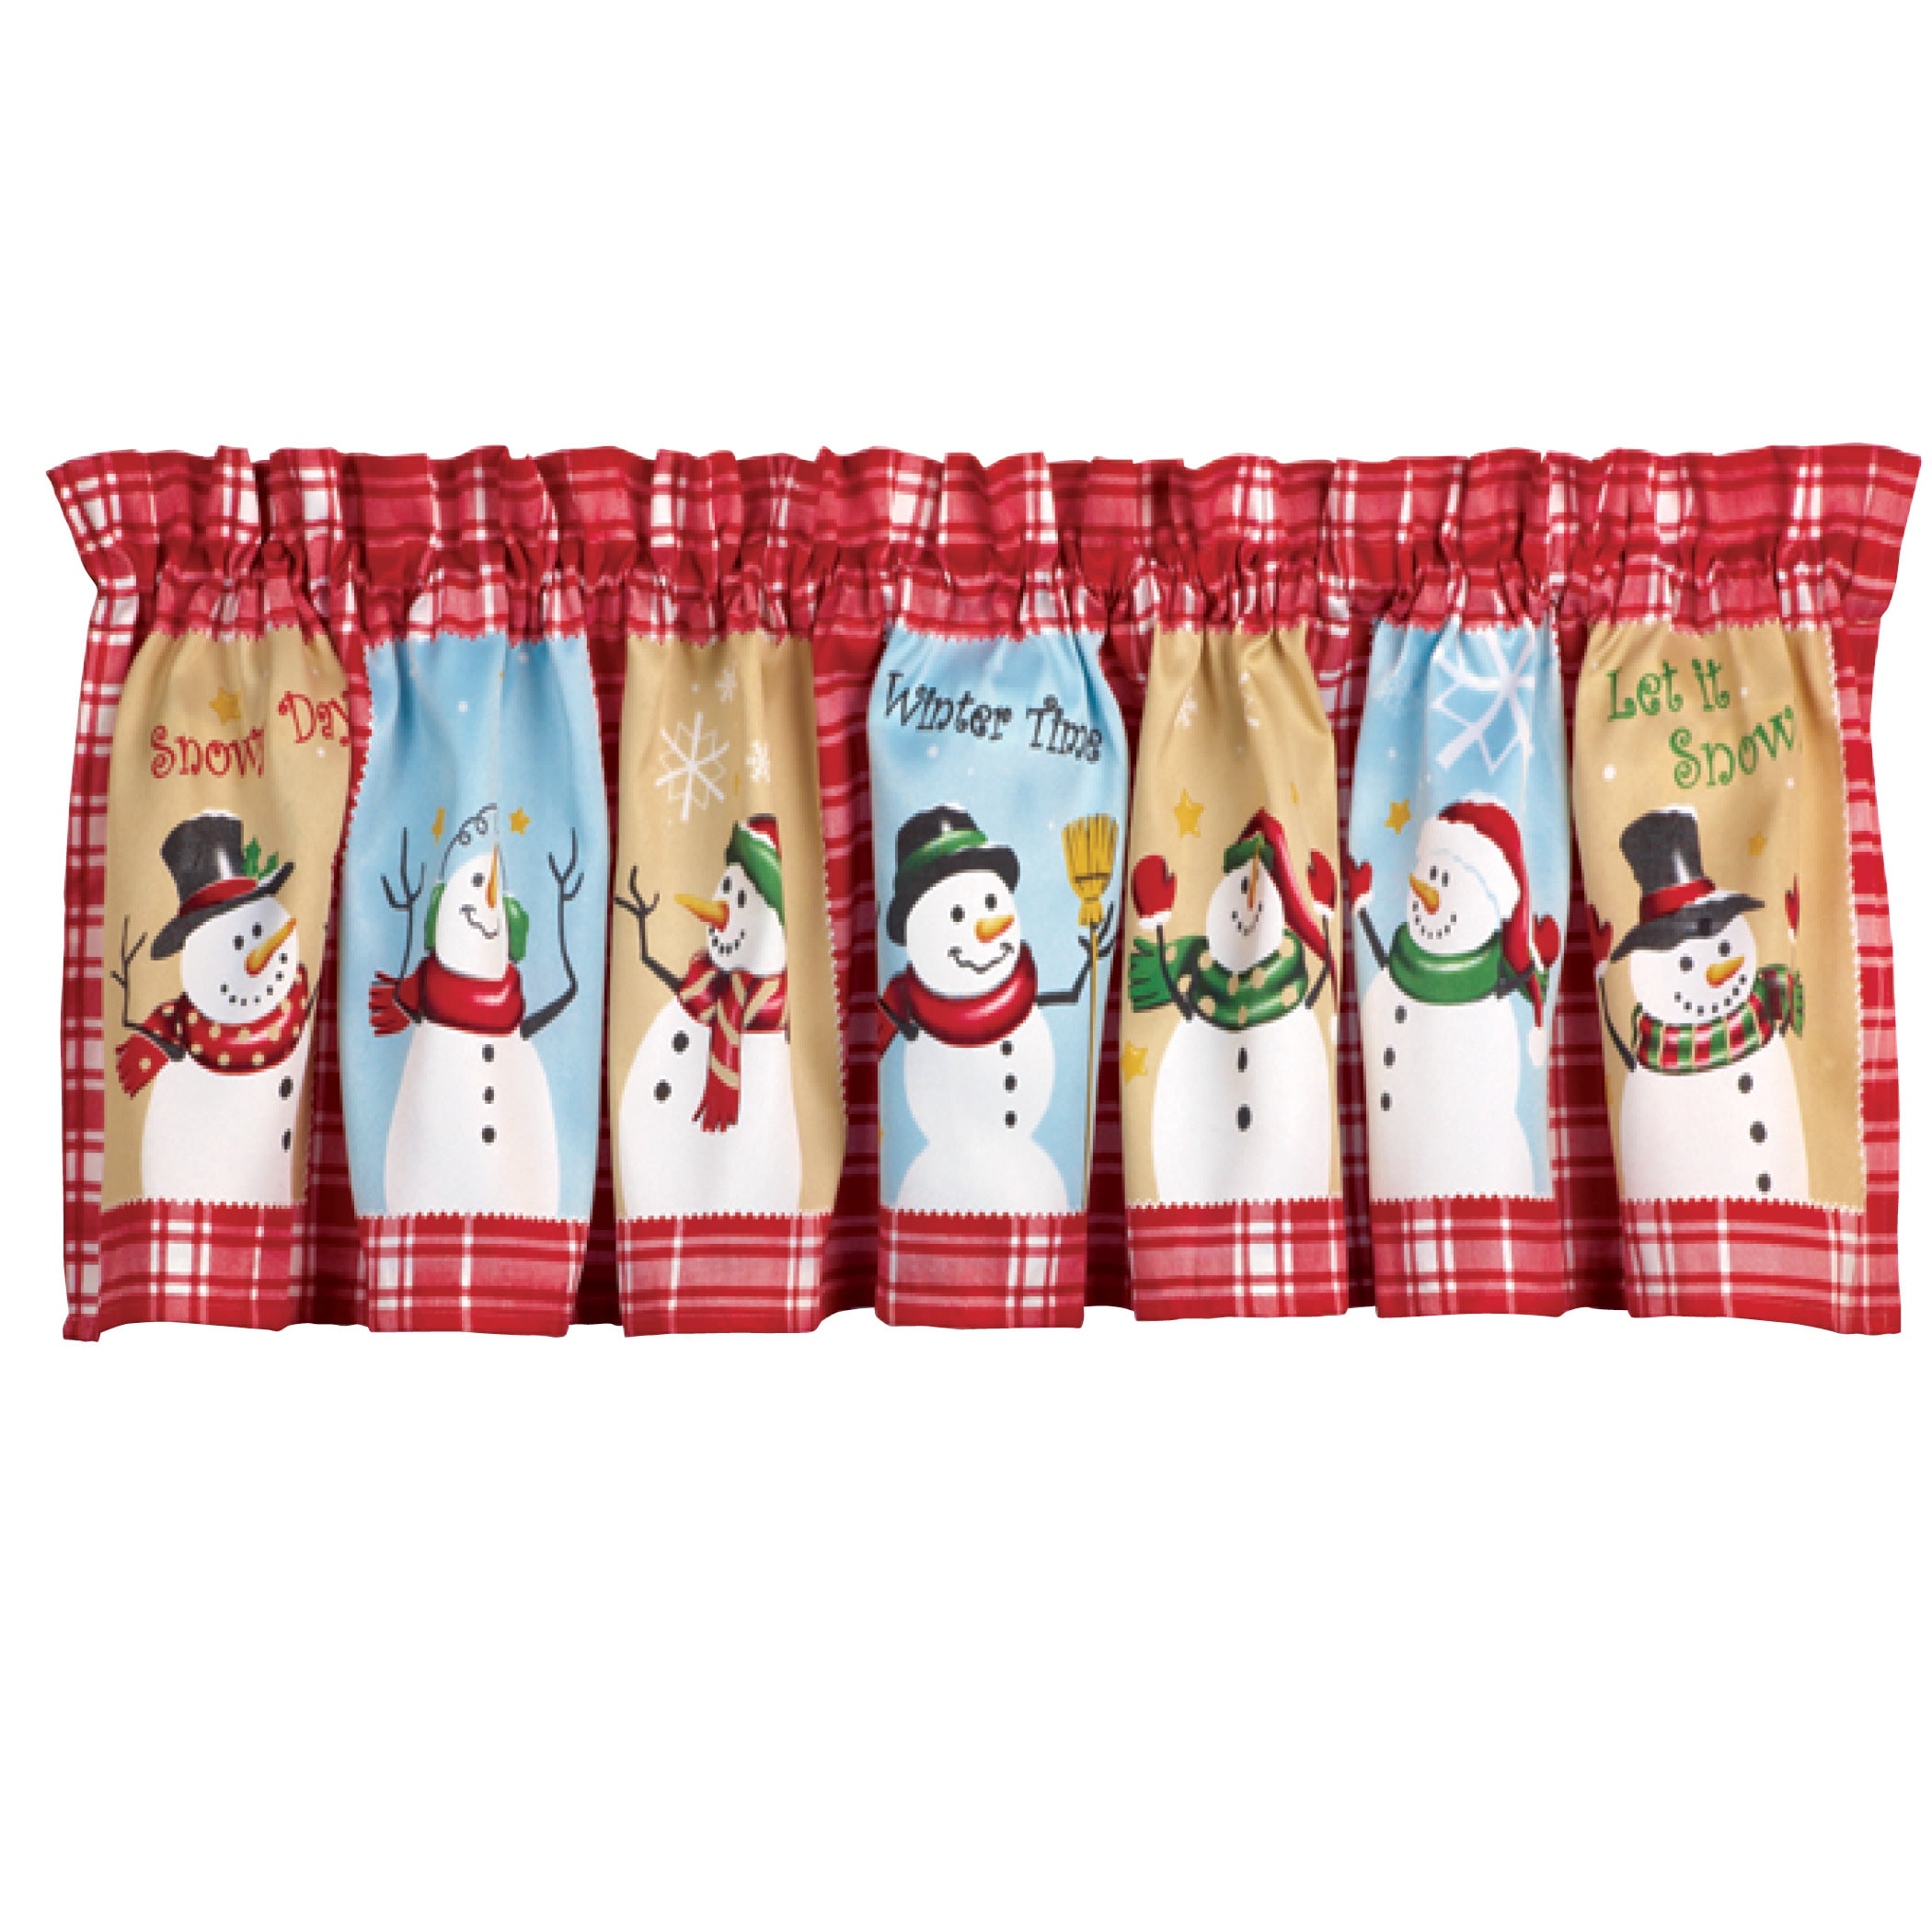 New Country Primitive Christmas Red Checked APPLIQUED SNOWMAN VALANCE Curtains 